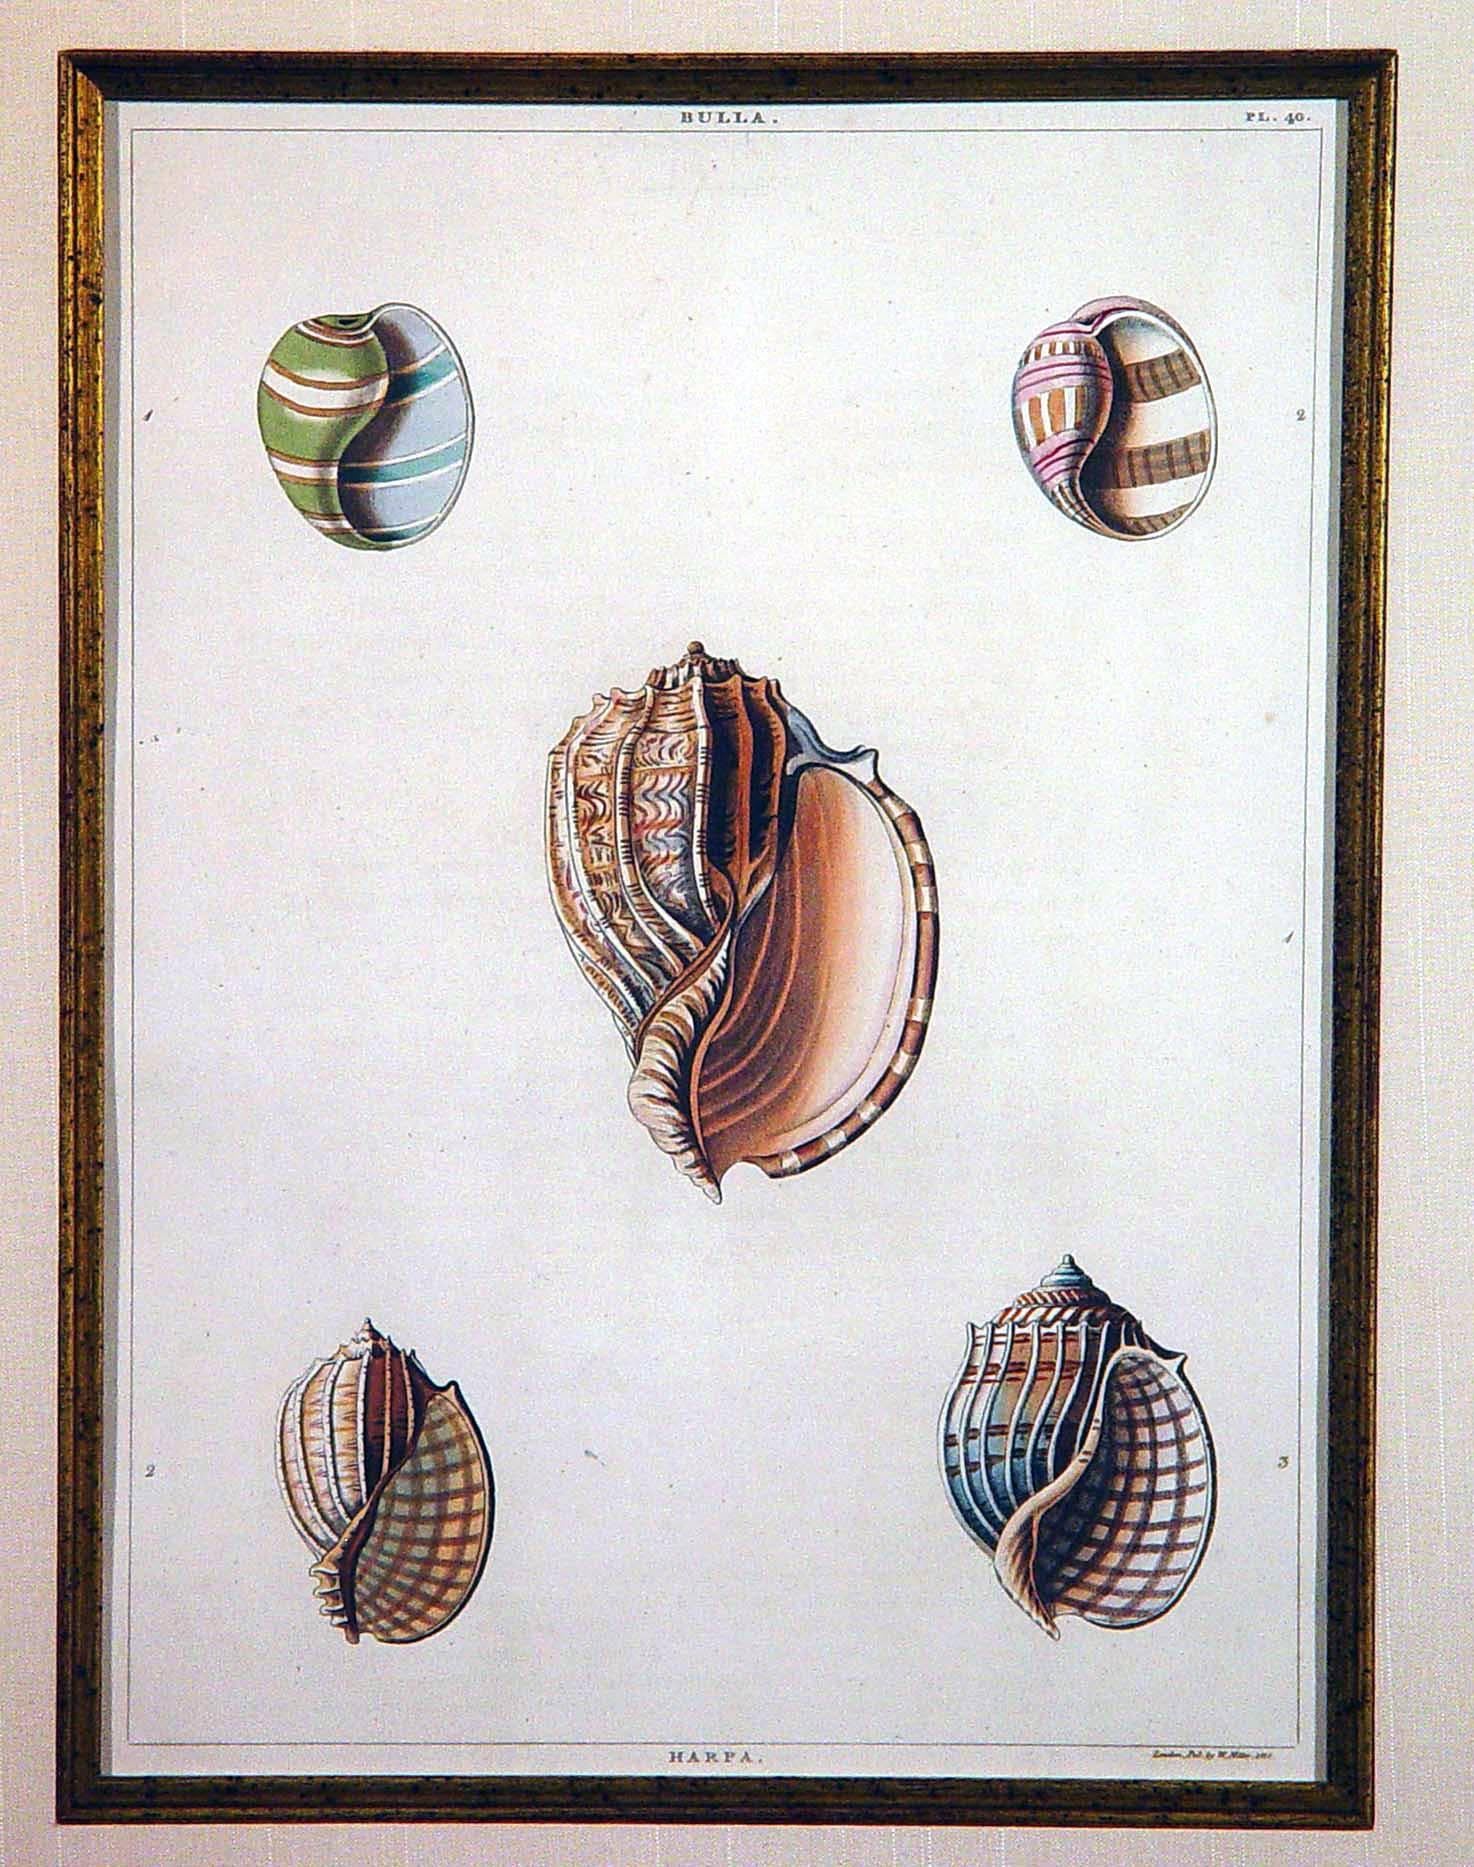 Regency Sea Shells Large Engraving George Perry from the Natural History of Shells